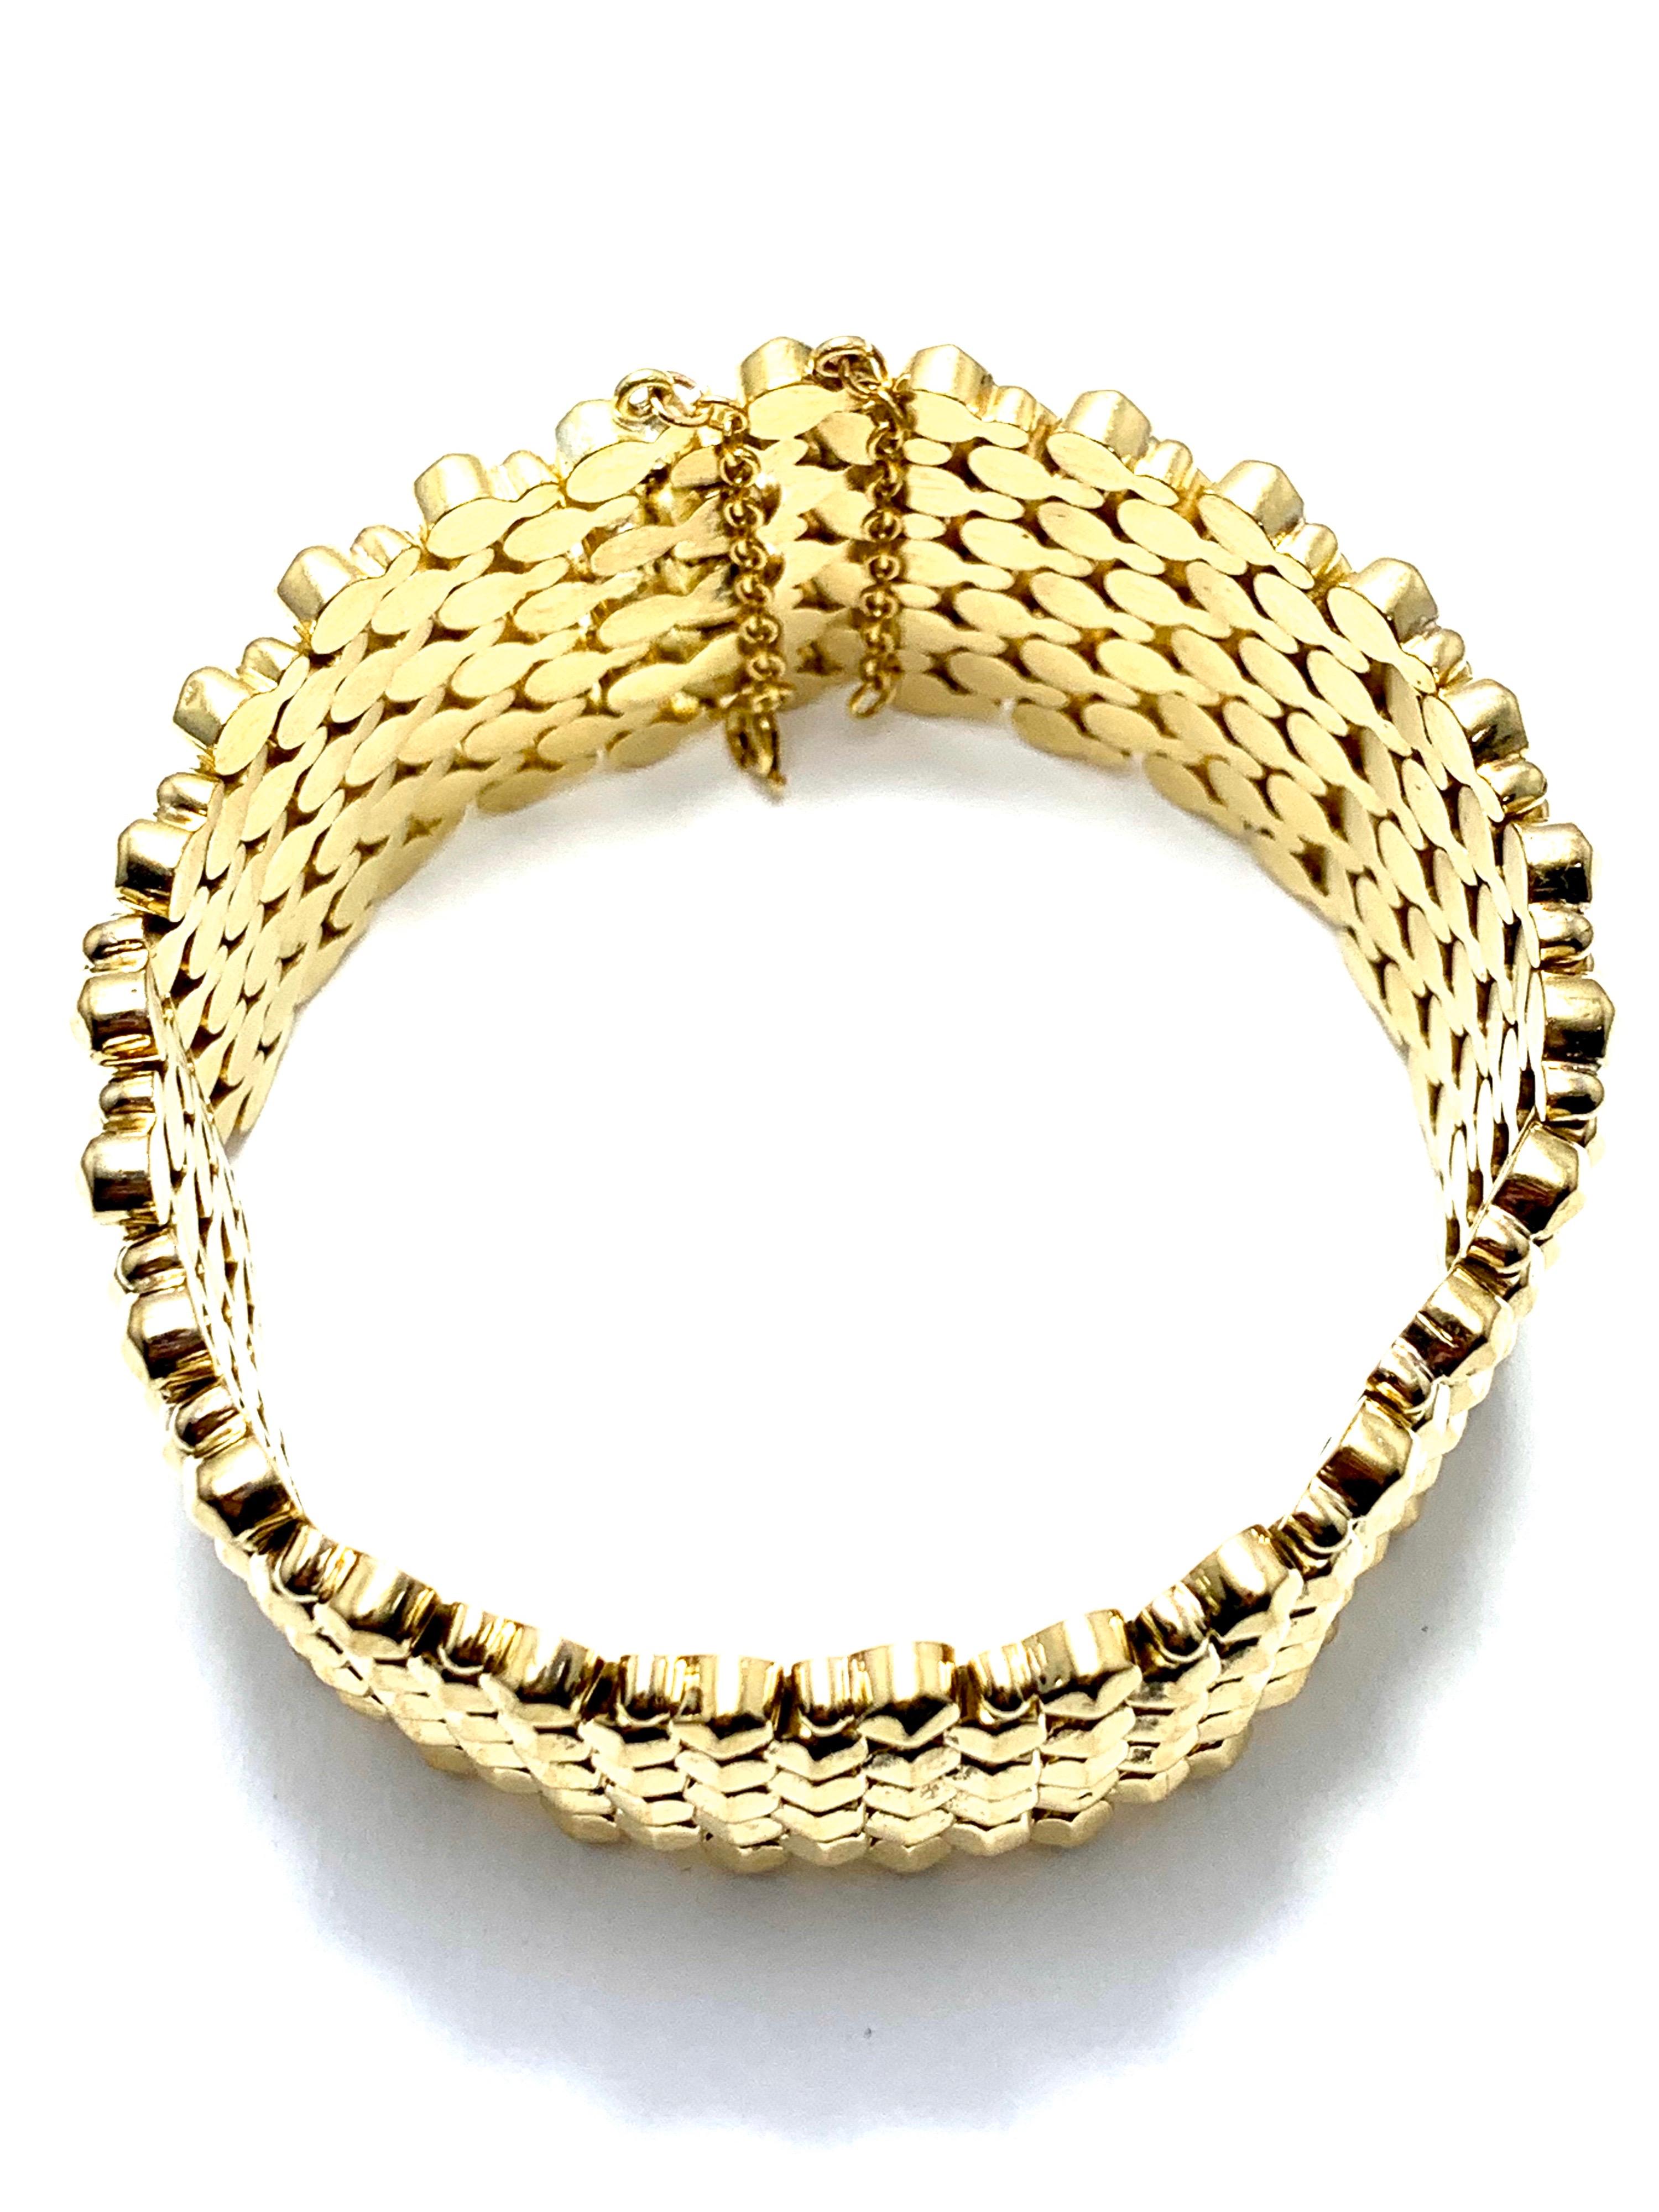 This is a fabulous bracelet to own.  The 1.25 inch wide 18 karat yellow gold bracelet has a super soft inside, with a cone shaped outside.  The bracelet features a triple locking closure, with a safety chain.  This bracelet measures 8.00 inches in